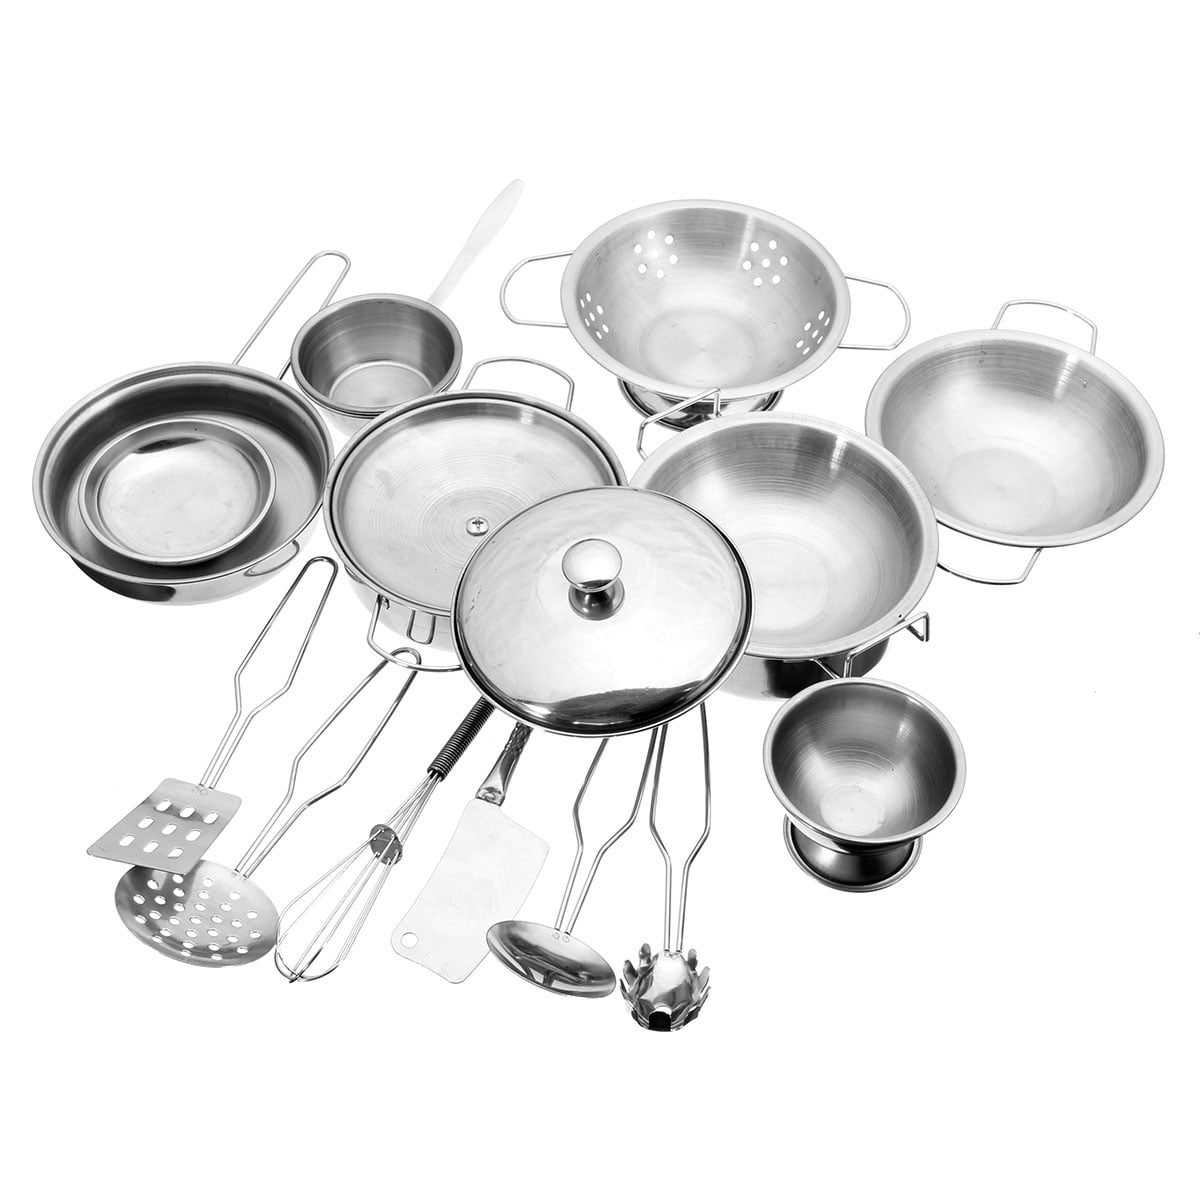 16pcs Metal Kitchen Cookware Gas Stove Set Kids Cook Pretend Play Toy Gifts 